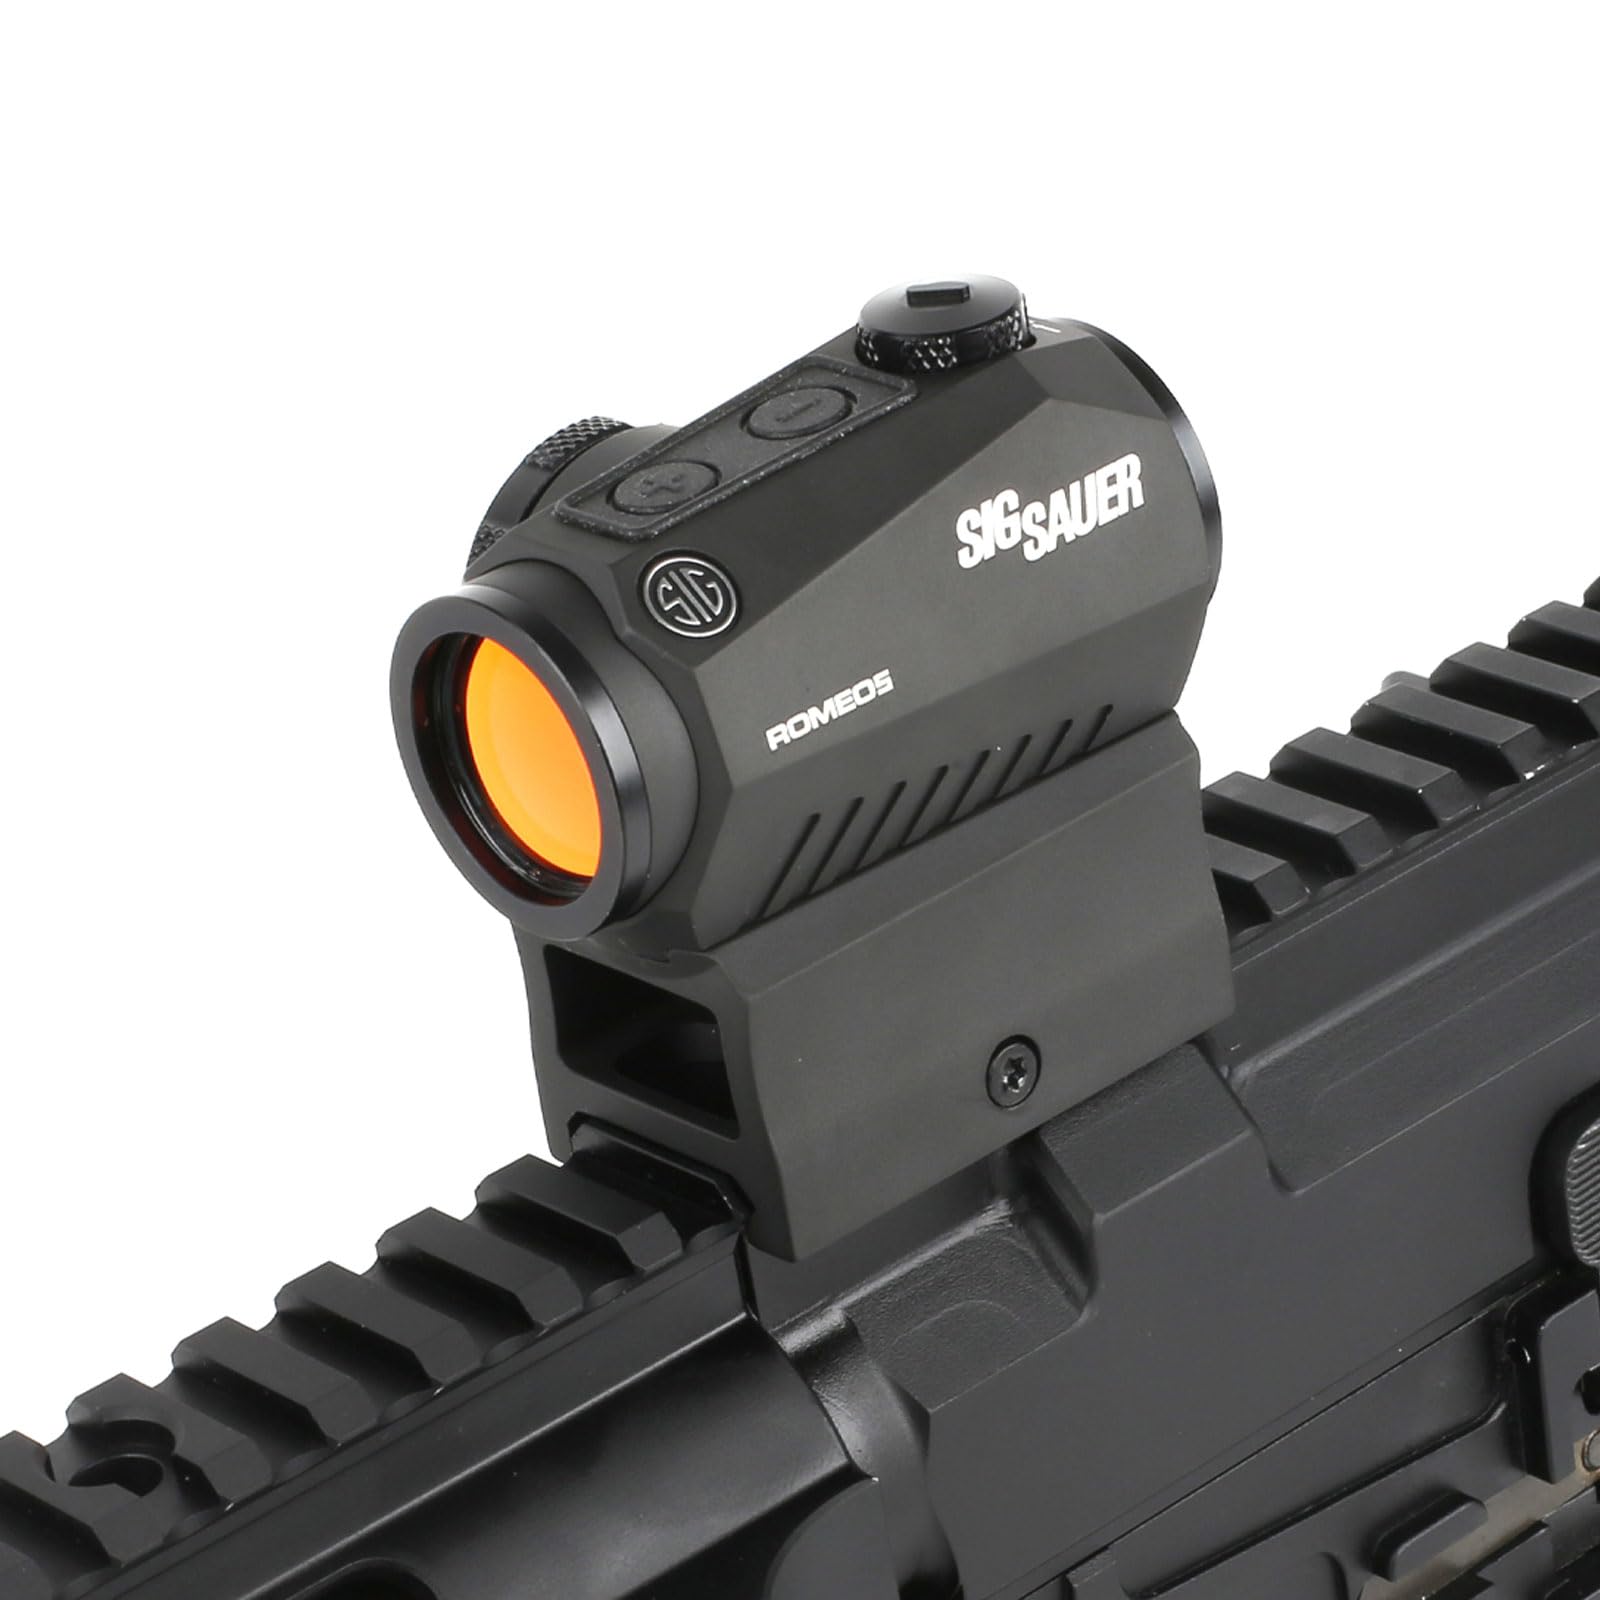 Sig Sauer Romeo5 1X20mm Tactical Hunting Shooting Durable Waterproof Fogproof Illuminated 2 MOA Red Dot Reticle Gun Sight, Picatinny Mount Included